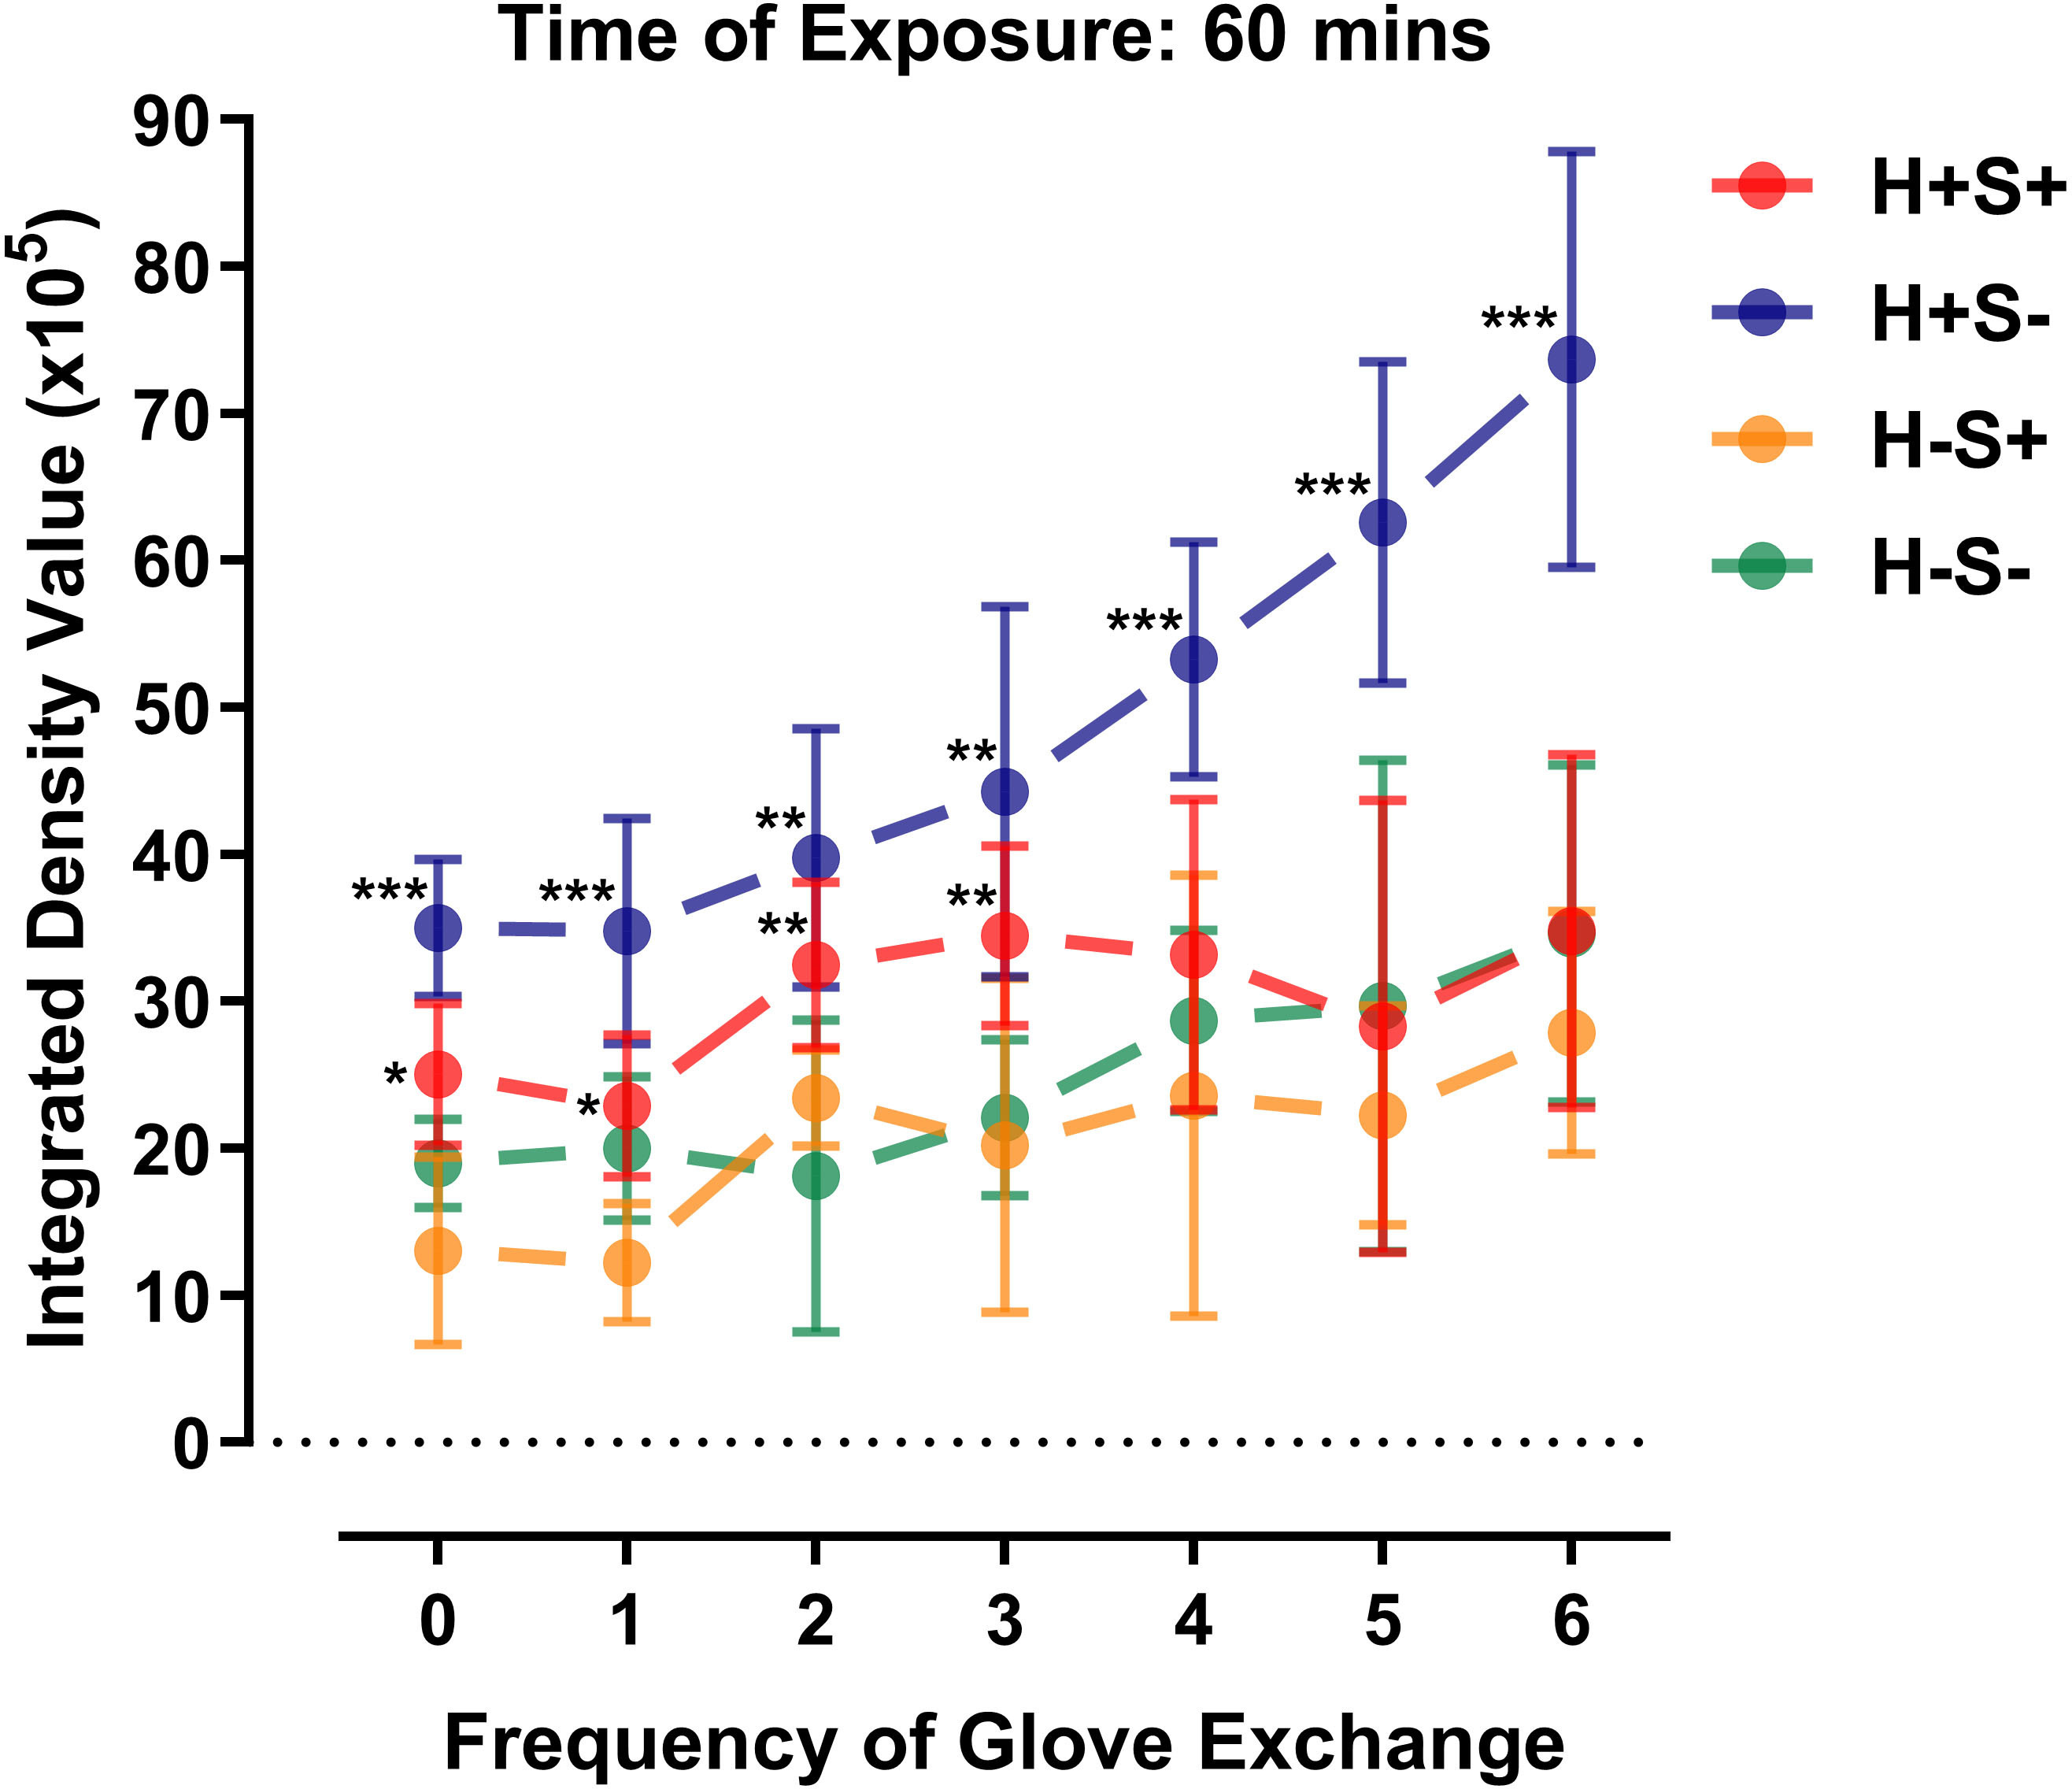 Fig. 3 
          Integrated density values of different simulation scenarios at various frequency of glove exchanges. *Significant difference from H-S+ (p < 0.05). **Significant difference from H-S- and H-S+ (p < 0.05). ***Significant difference from H+S+, H-S+, and H-S- (p < 0.05).
        